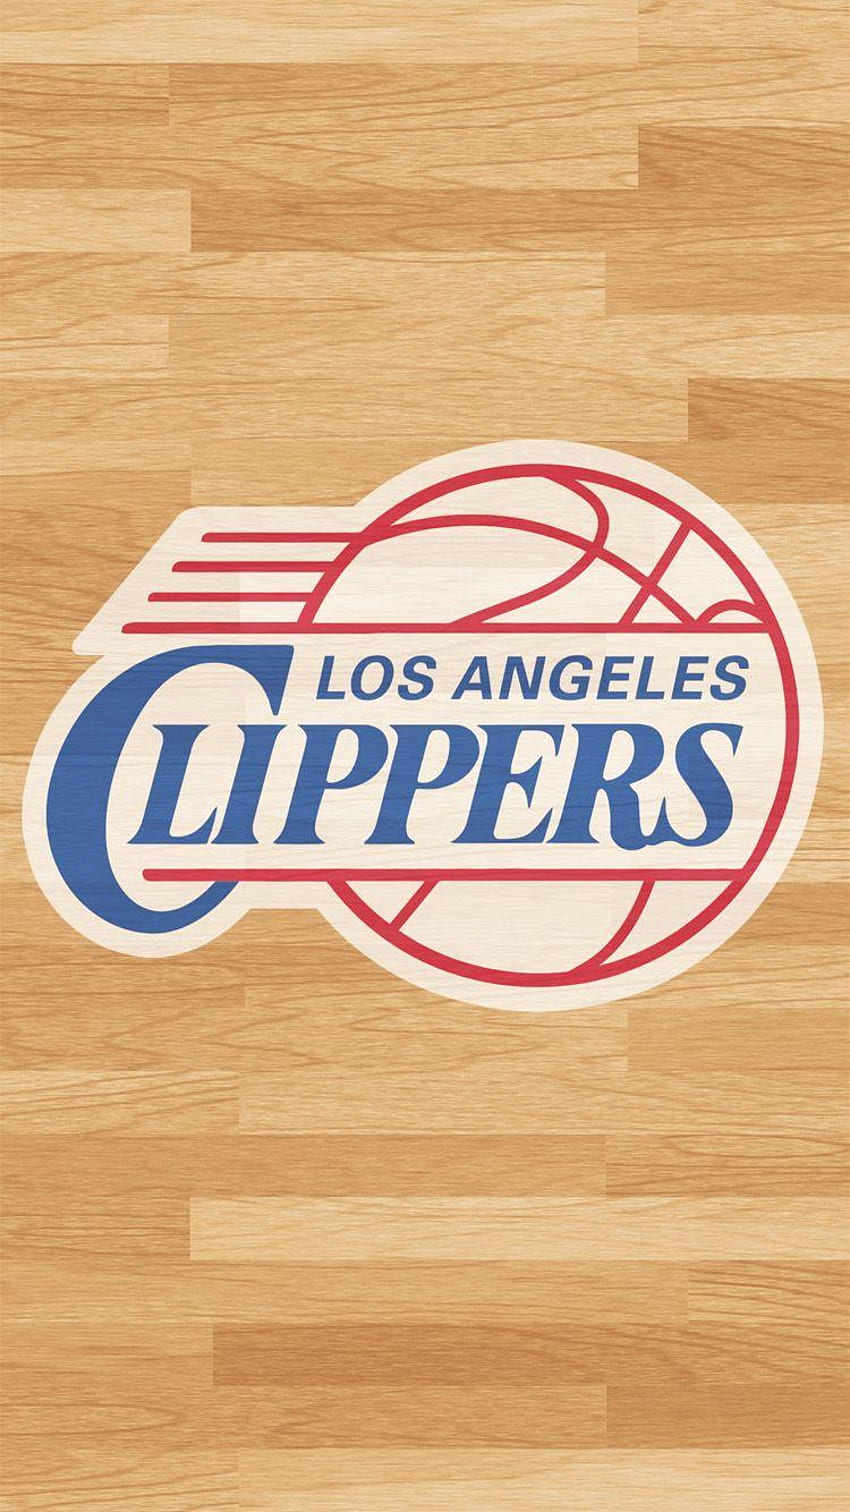 Los Angeles Clippers wallpaper ponsel HD